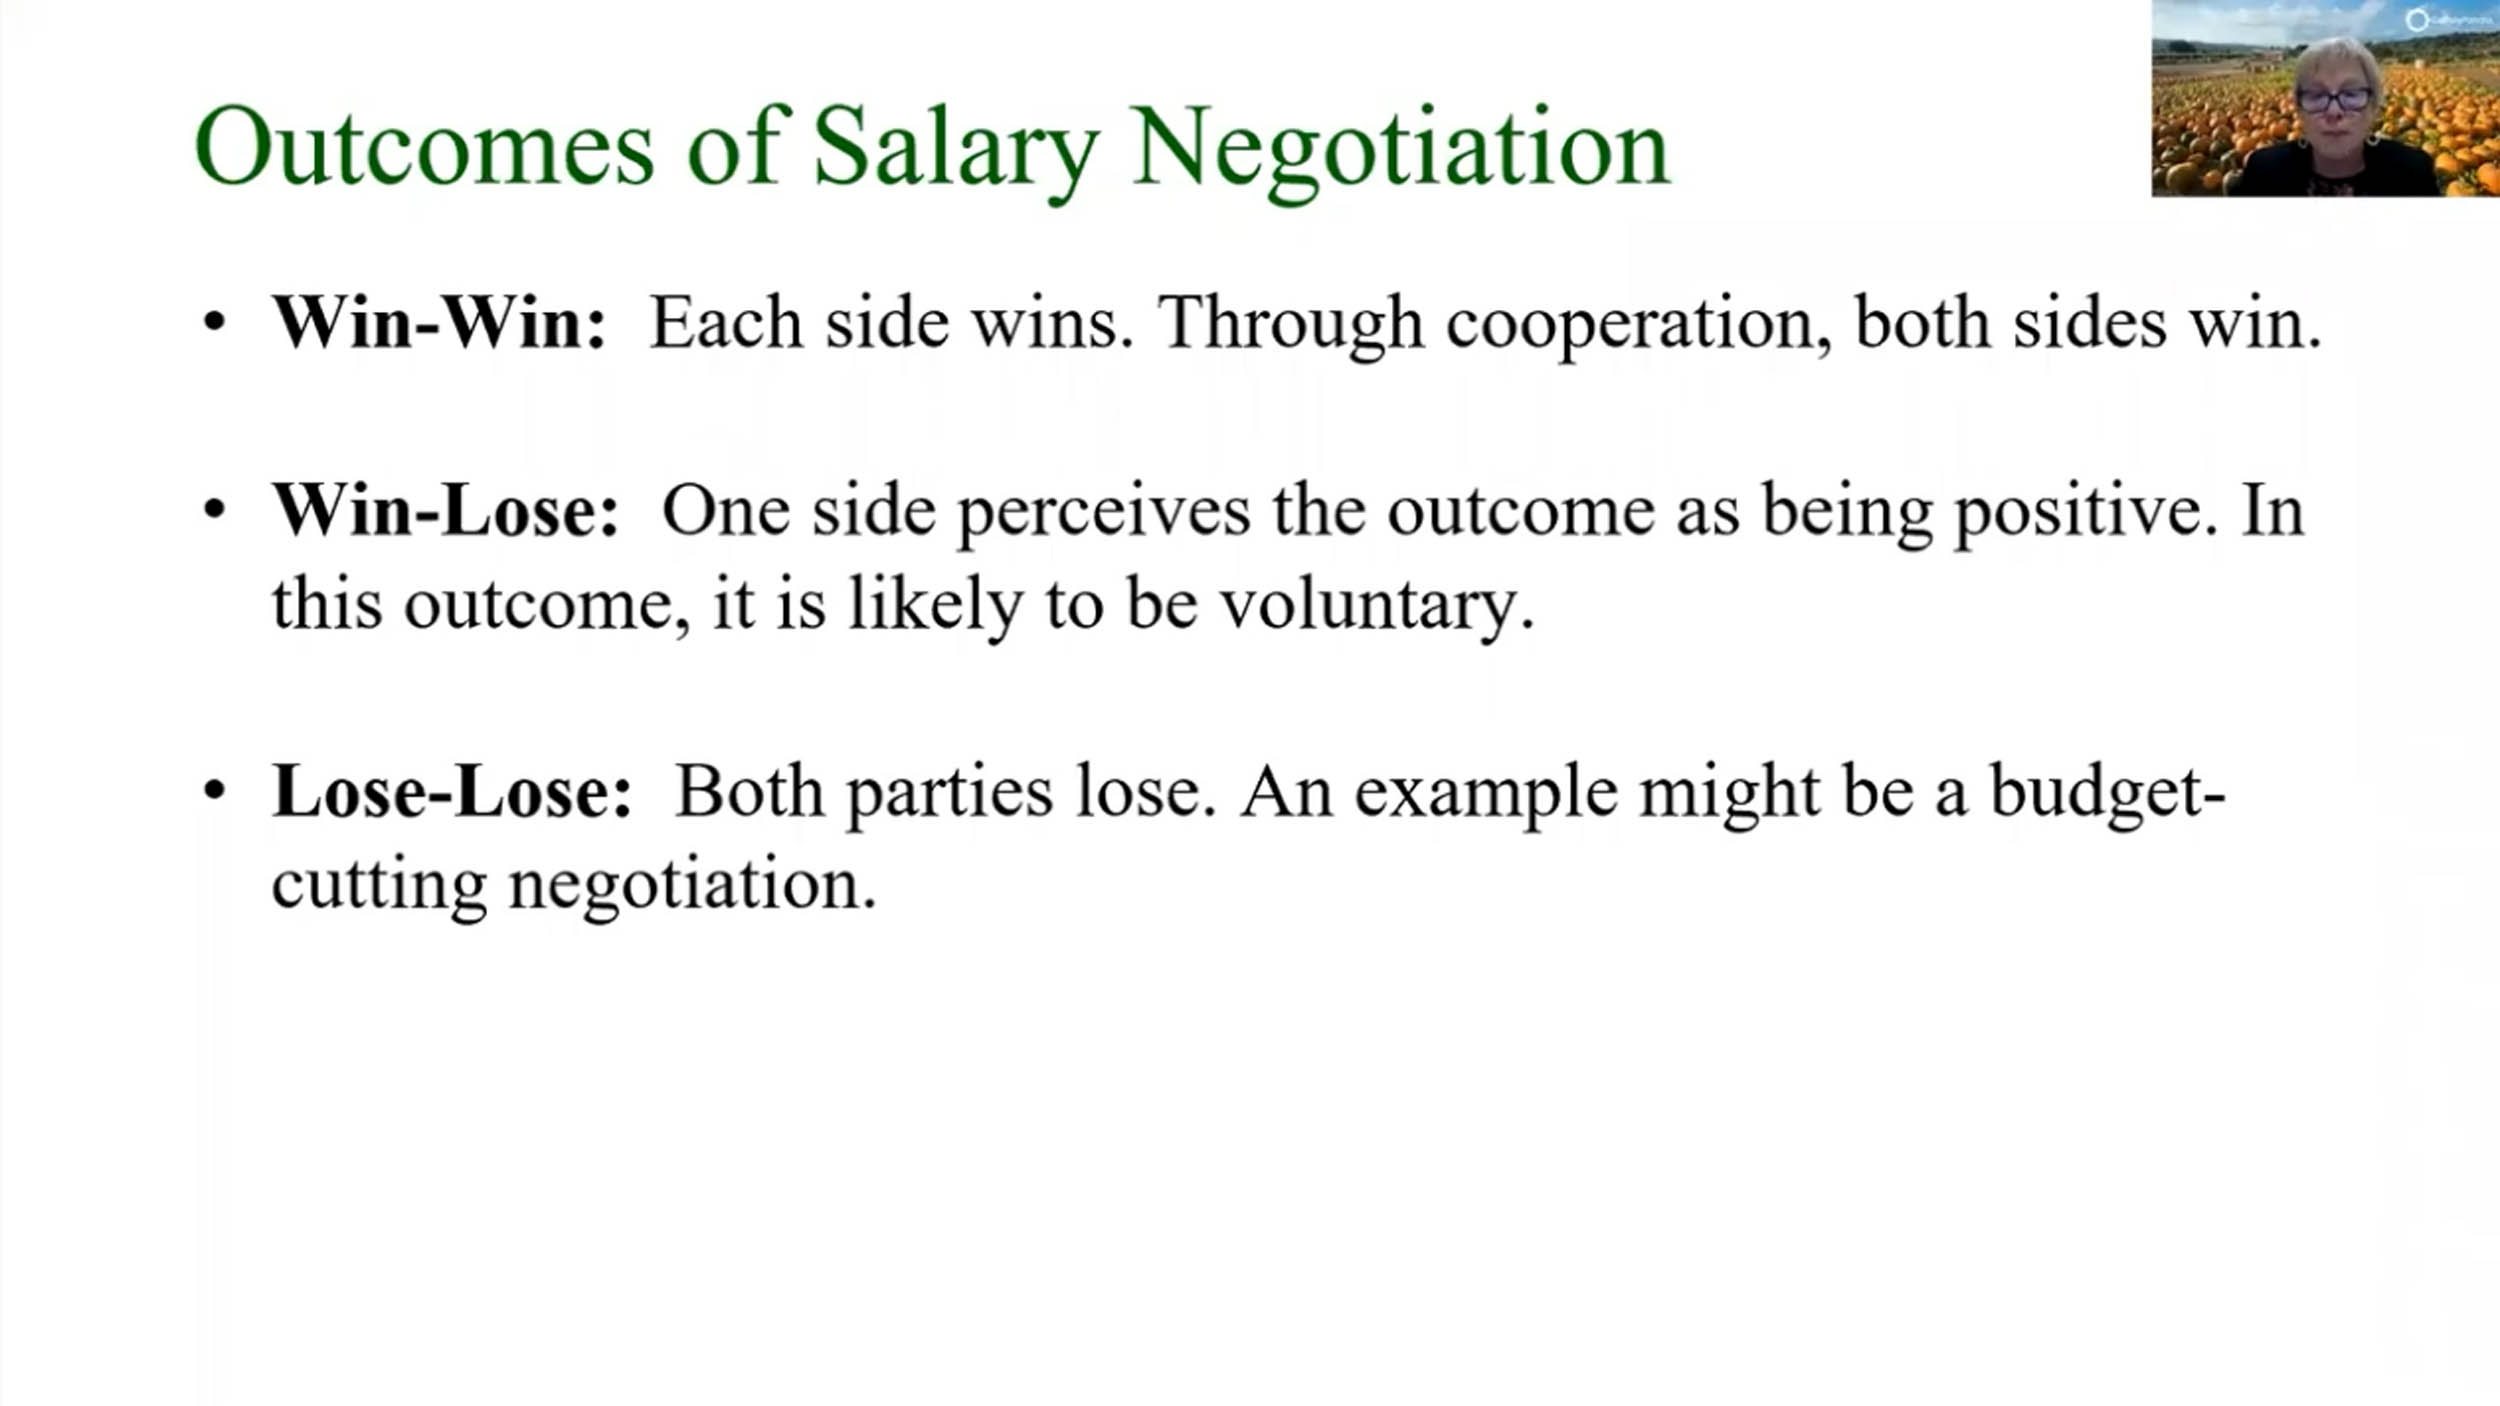 A PowerPoint presentation detailing the outcomes of salary negotiation.